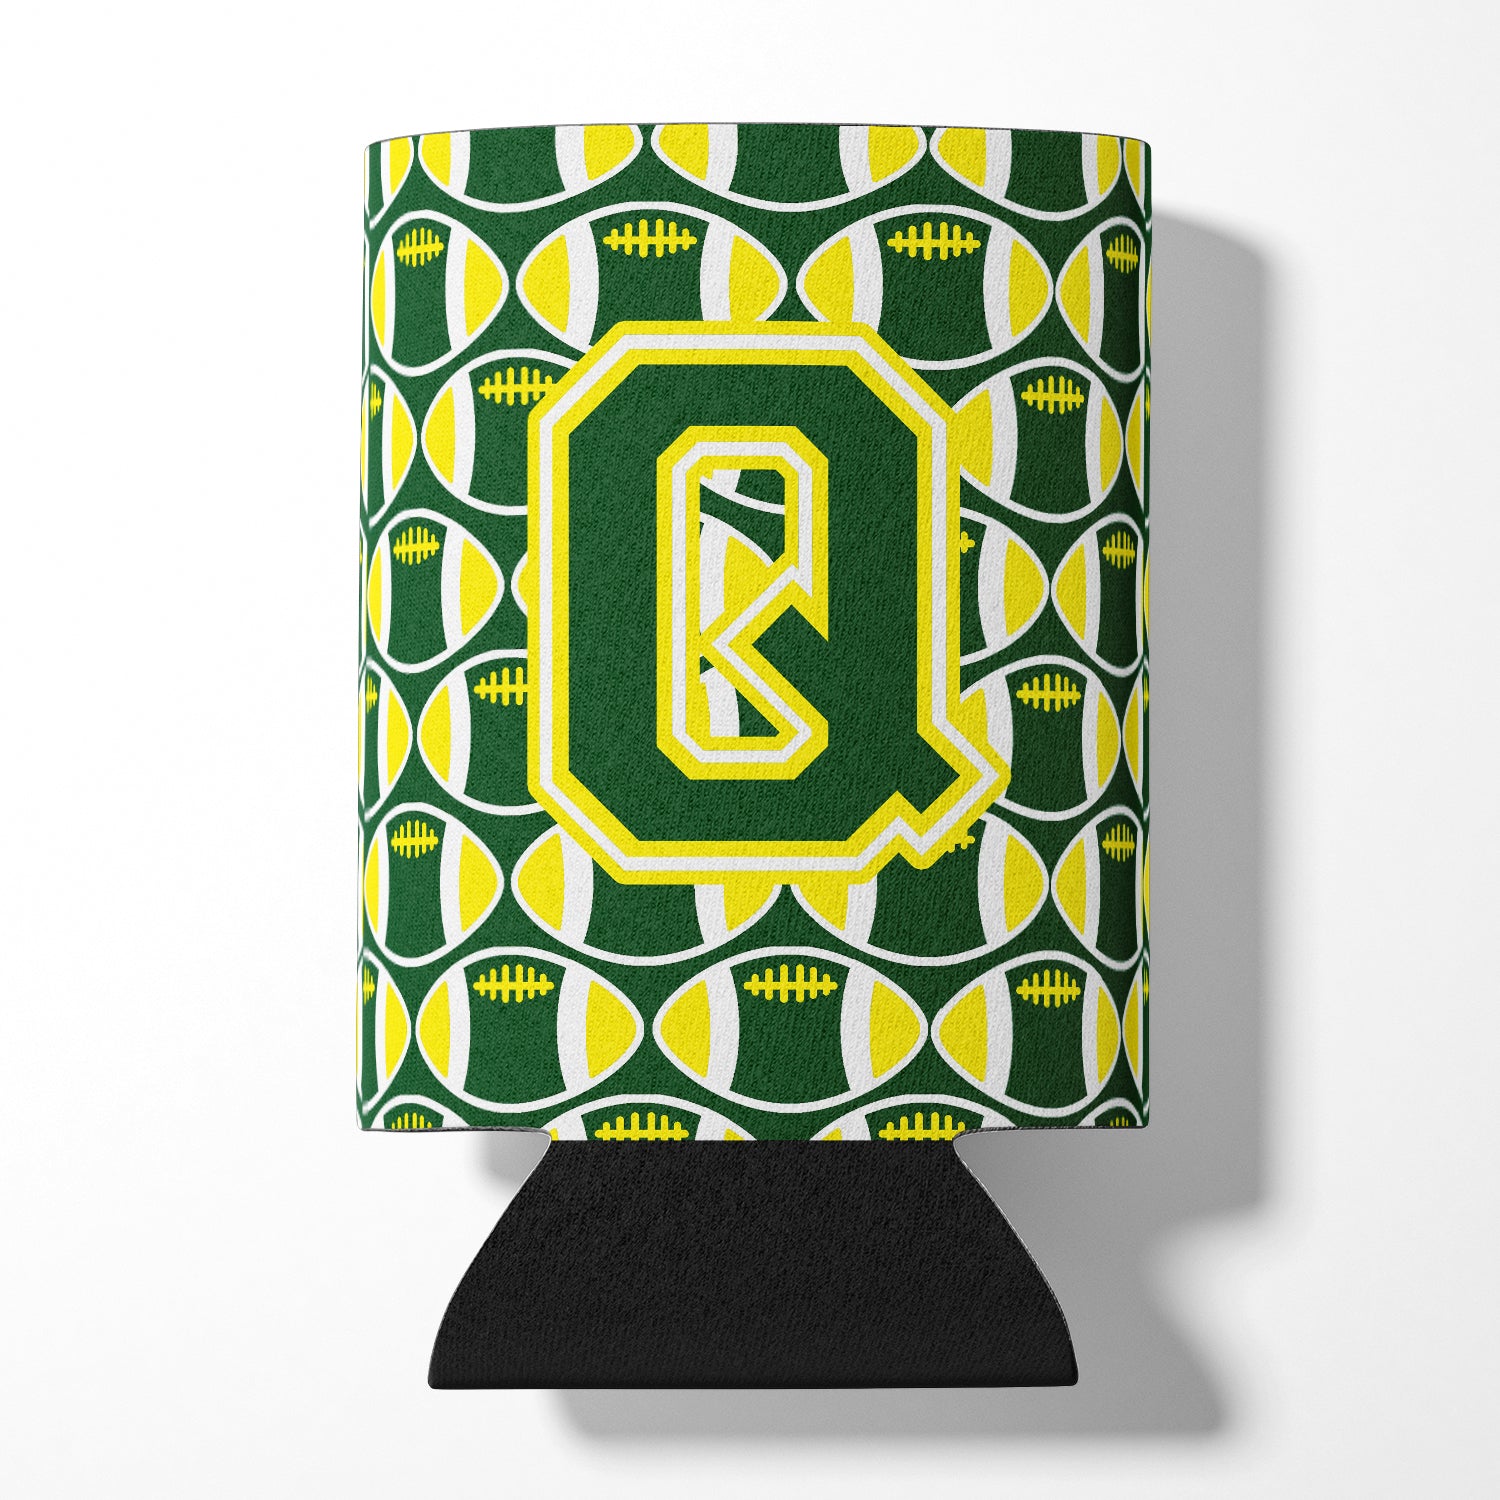 Letter Q Football Green and Yellow Can or Bottle Hugger CJ1075-QCC.